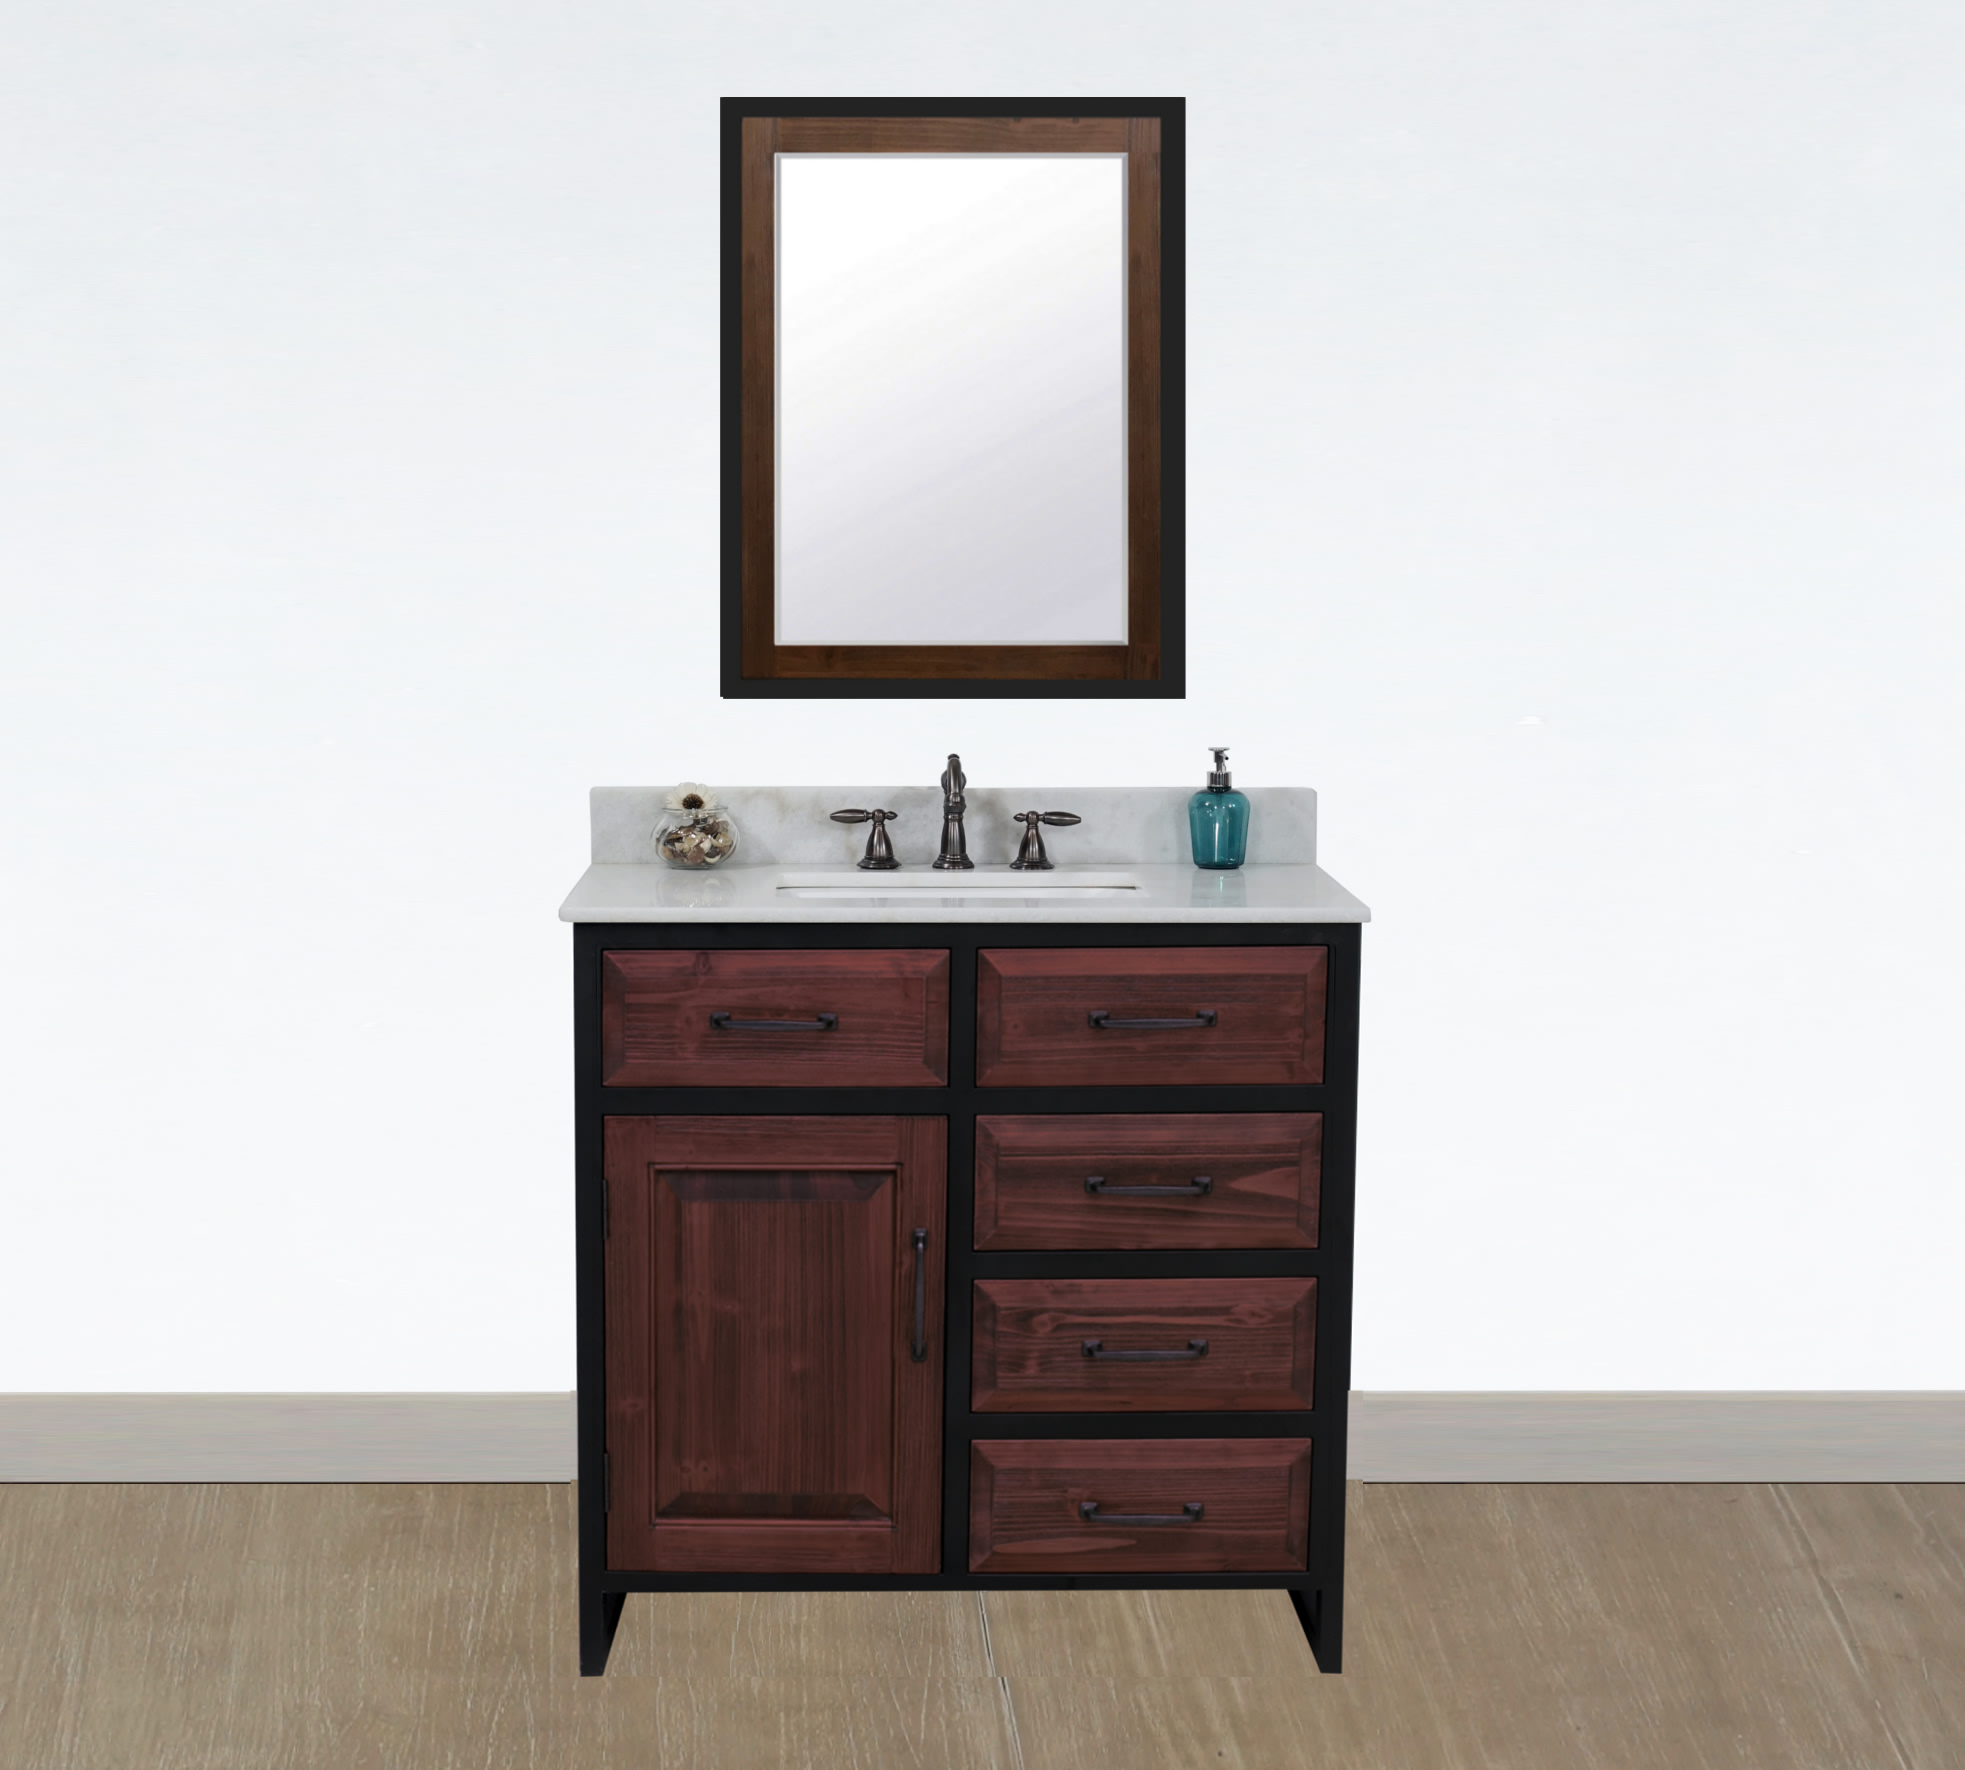 36" Rustic Solid Fir Single Sink with Iron Frame Vanity in Brown Driftwood - No Faucet with Countertop Options